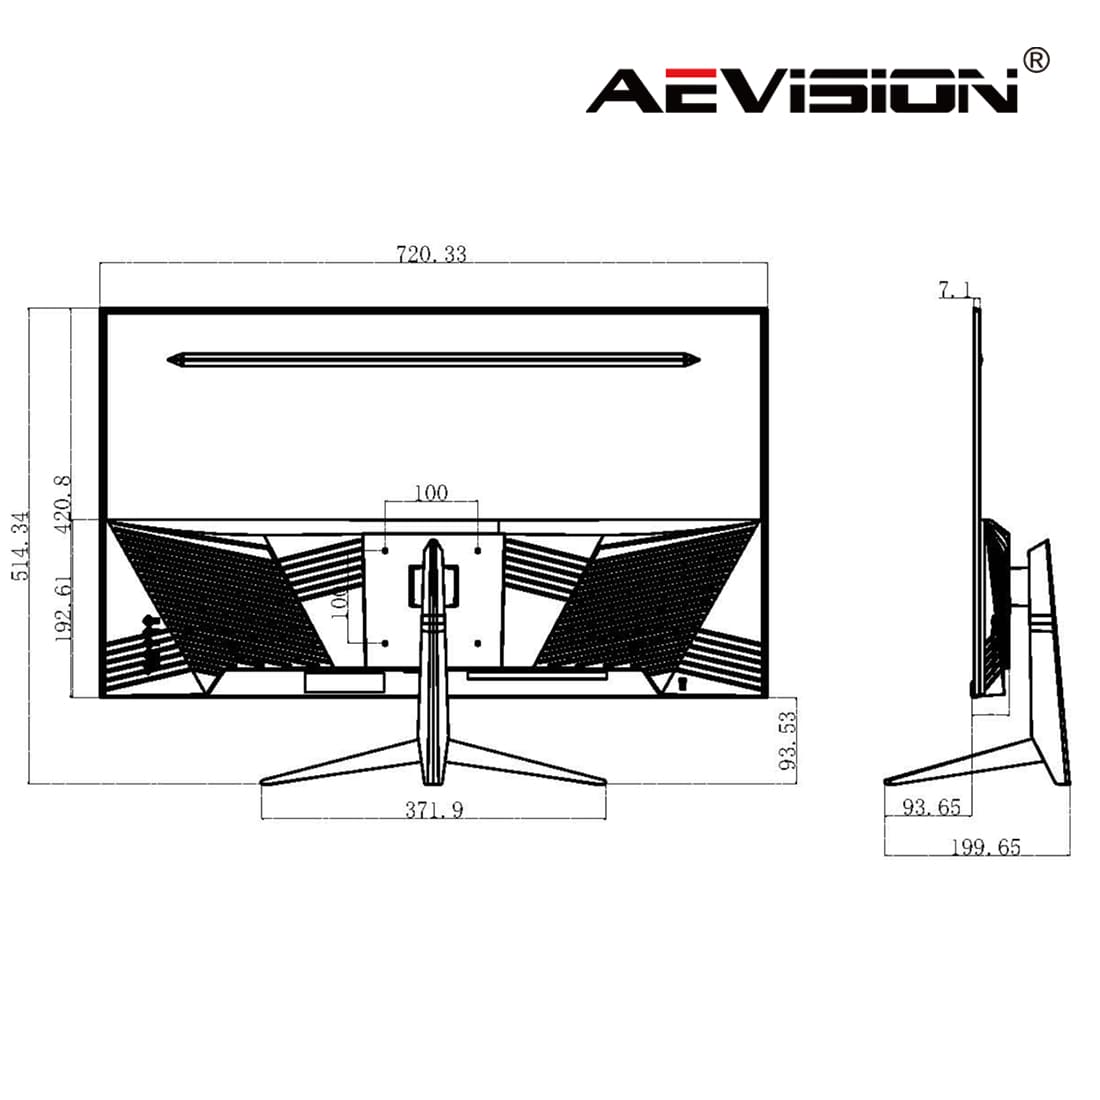 32-inch PC Monitor Thin And Simple For Office And CCTV